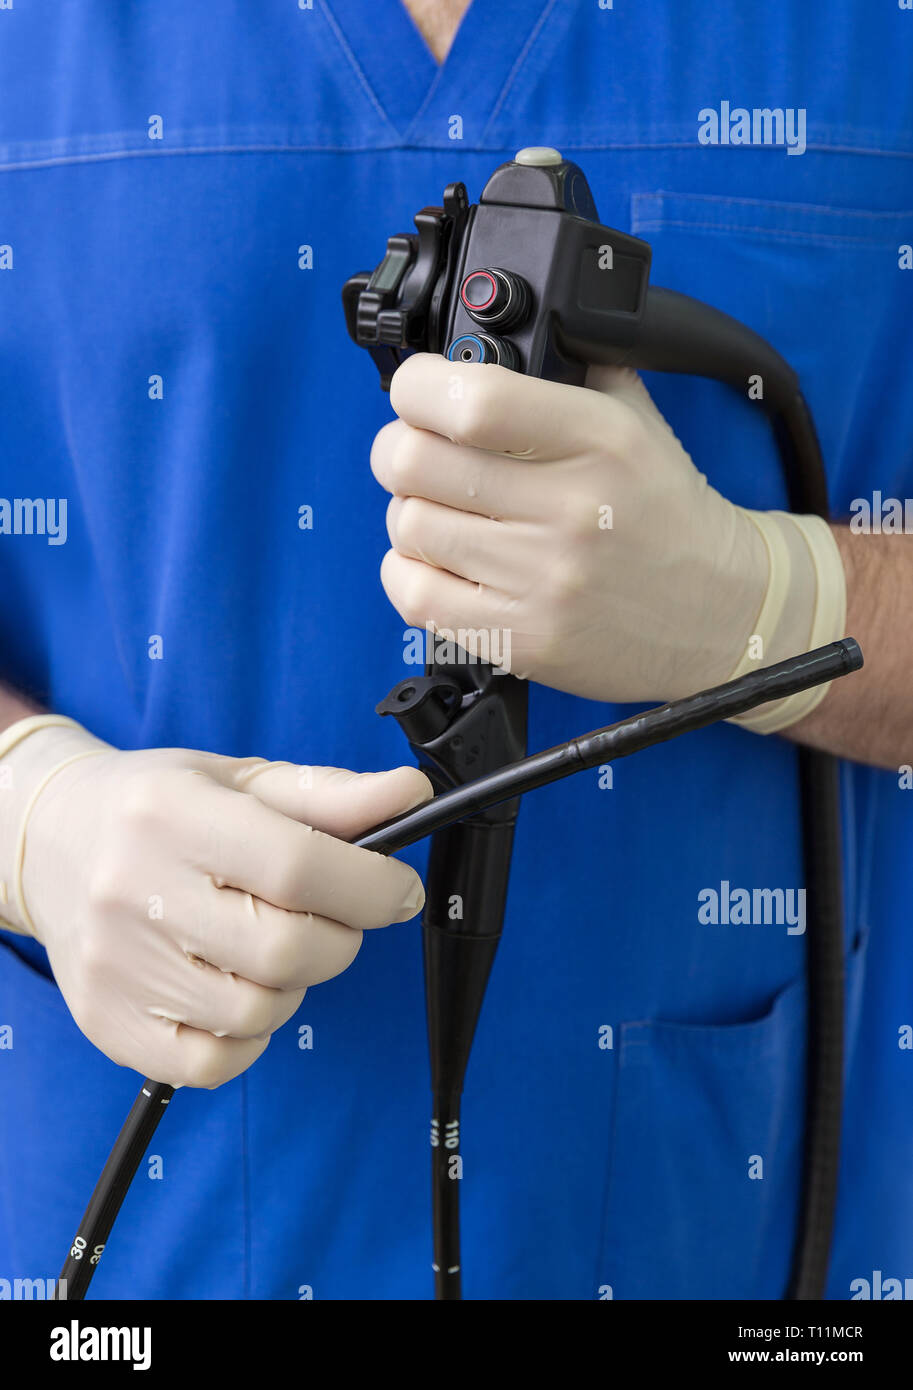 endoscope in the hands of doctor Stock Photo